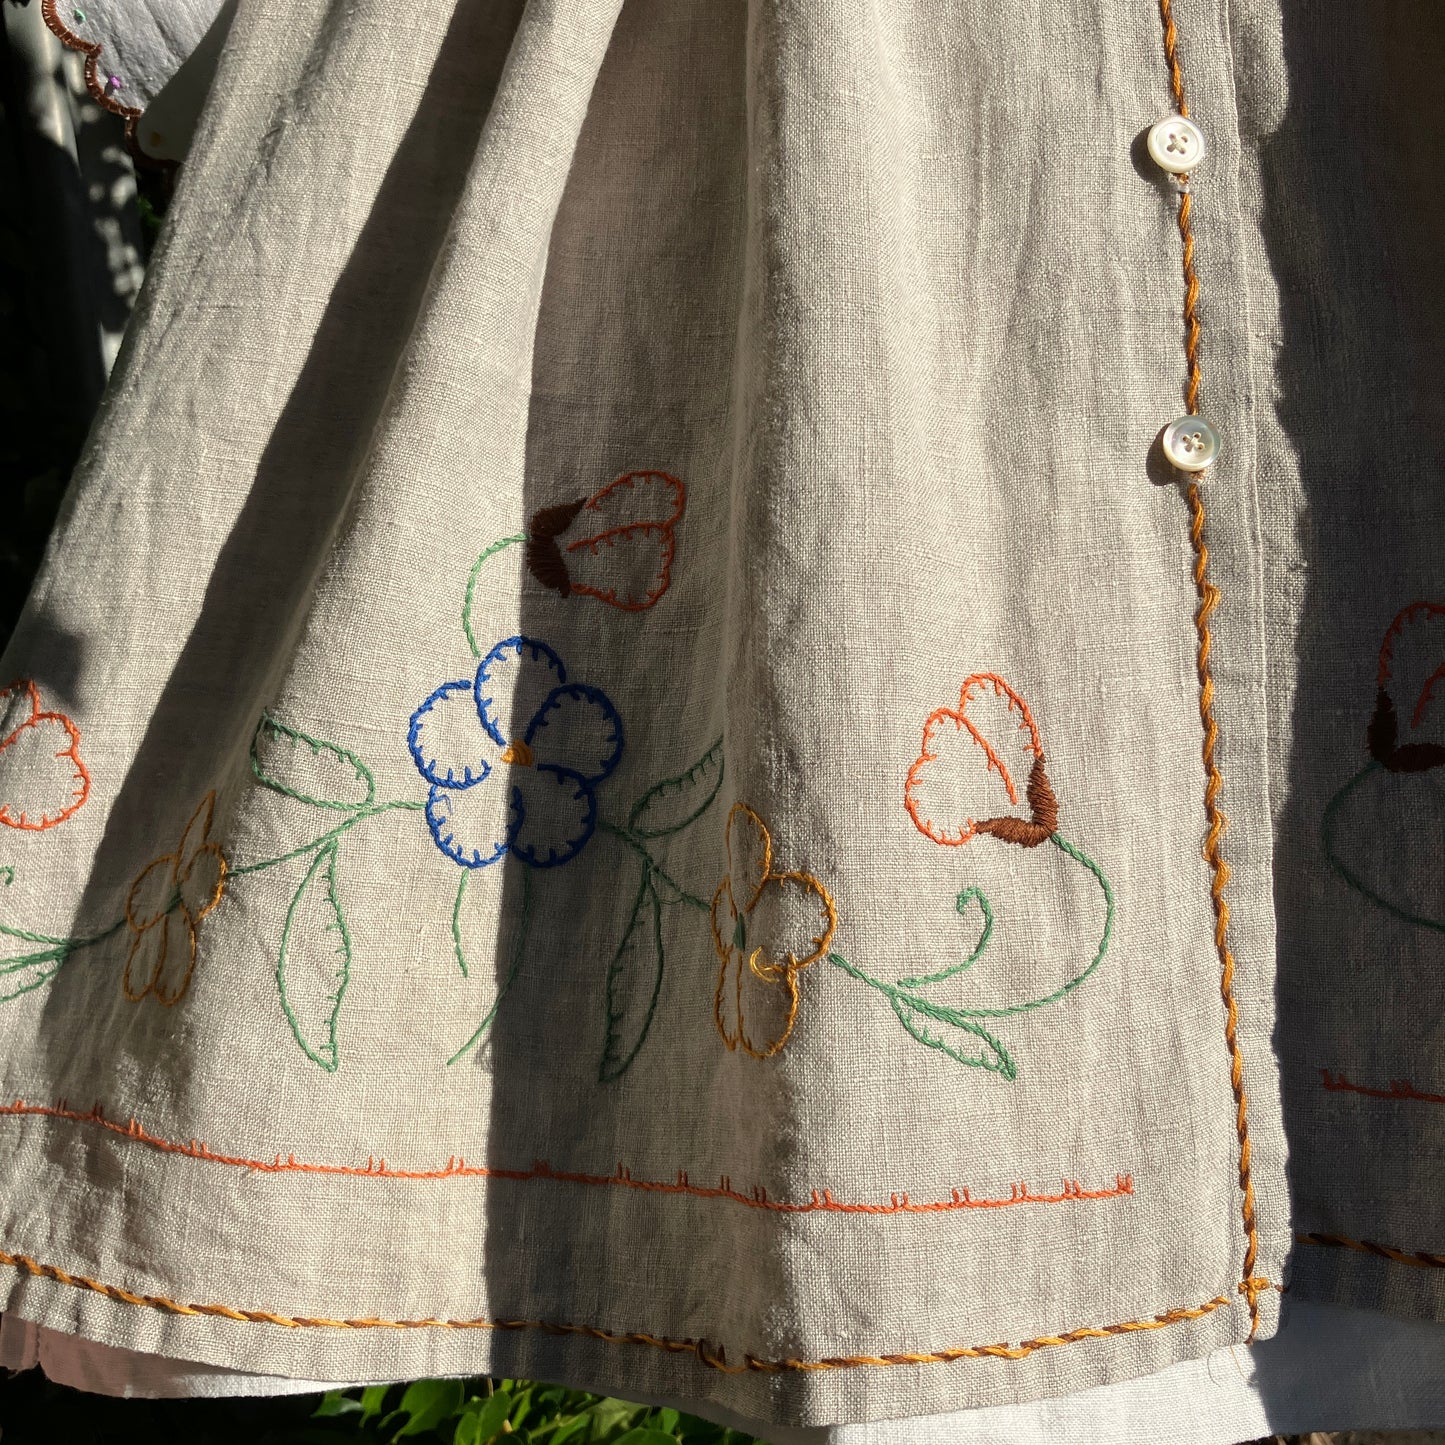 Recycled hand embroidered linen shirt